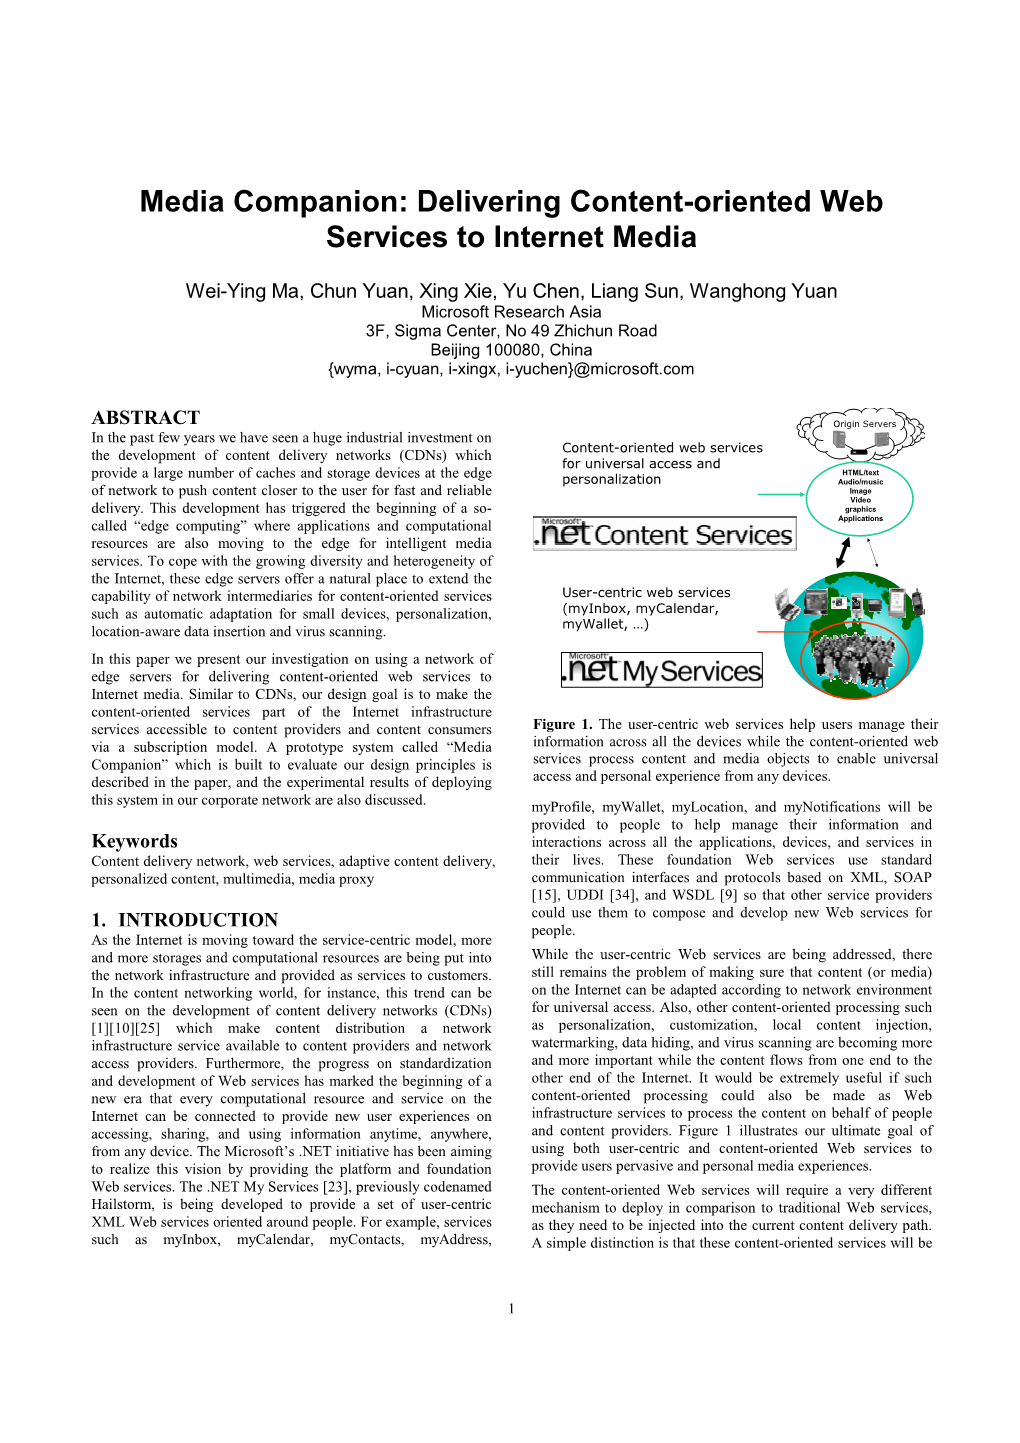 Delivering Content-Oriented Web Services to Internet Media